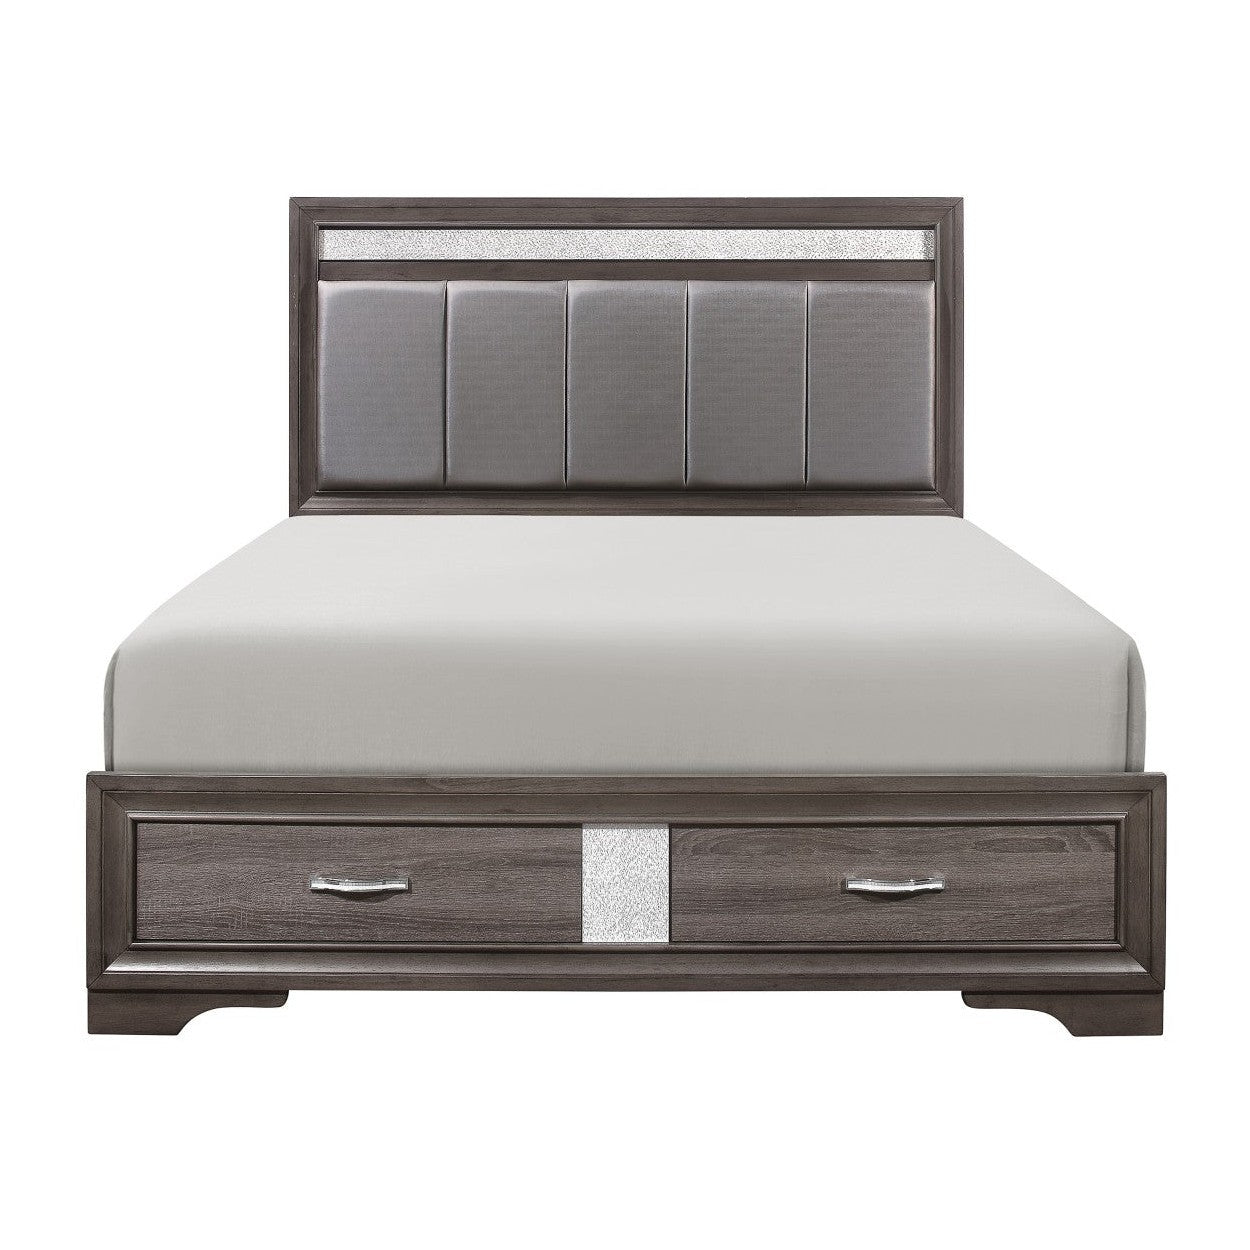 (3) Queen Platform Bed with Footboard Drawers 1505-1*